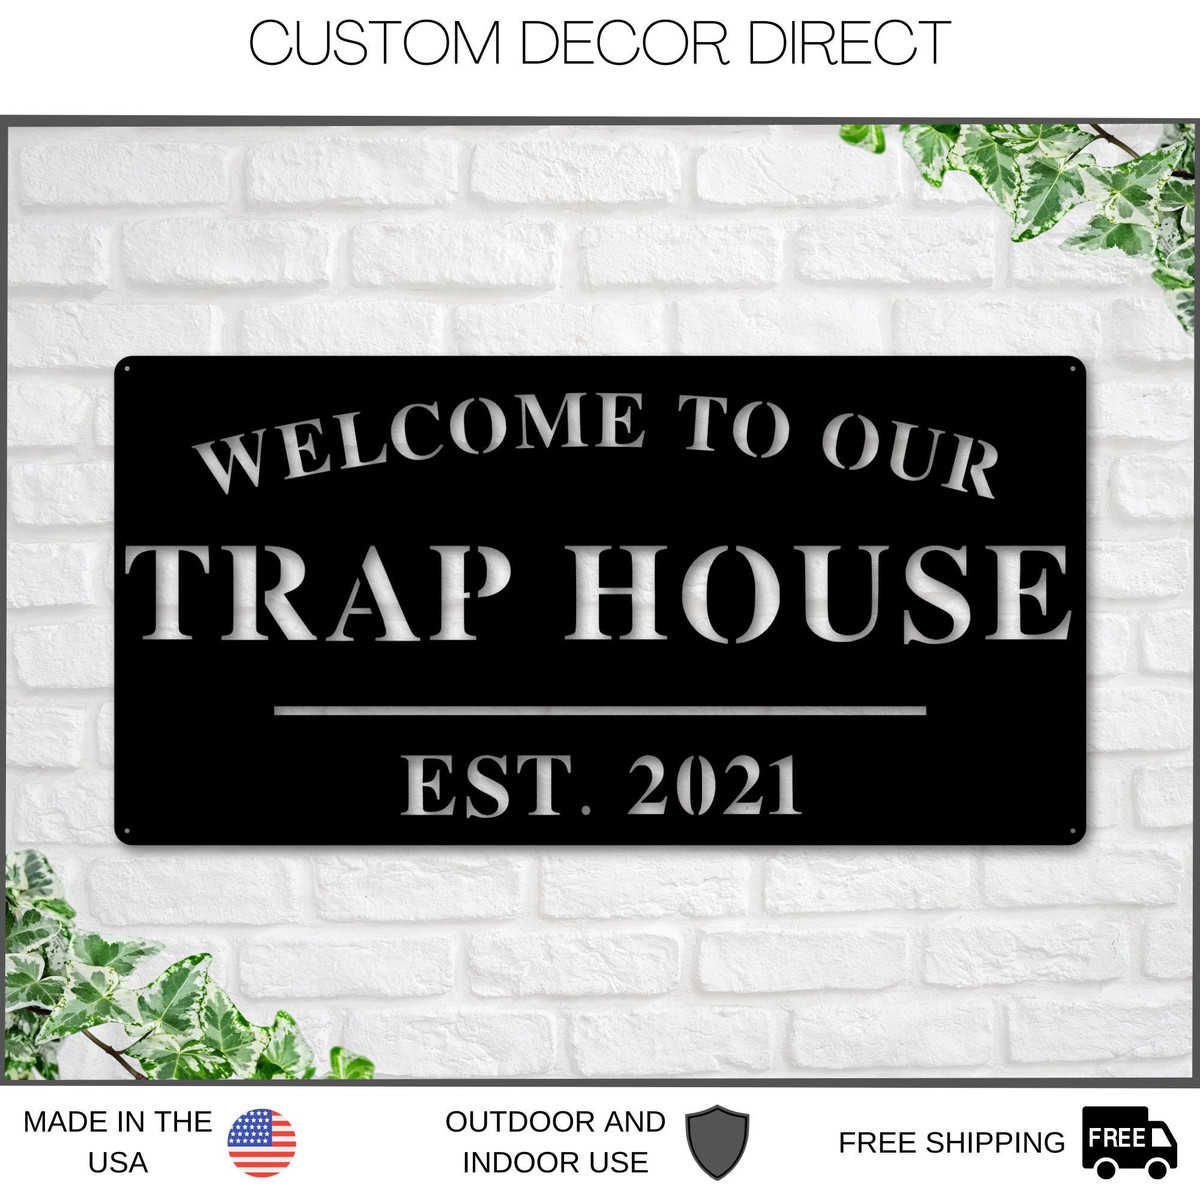 Welcome To Our Trap House Sign, Personalized Trap House Sign, Outdoor Trap House Sign, Backyard Decor, Welcome Trap House Sign, Personalized Laser Cut Metal Signs Custom Gift Ideas 12x12IN